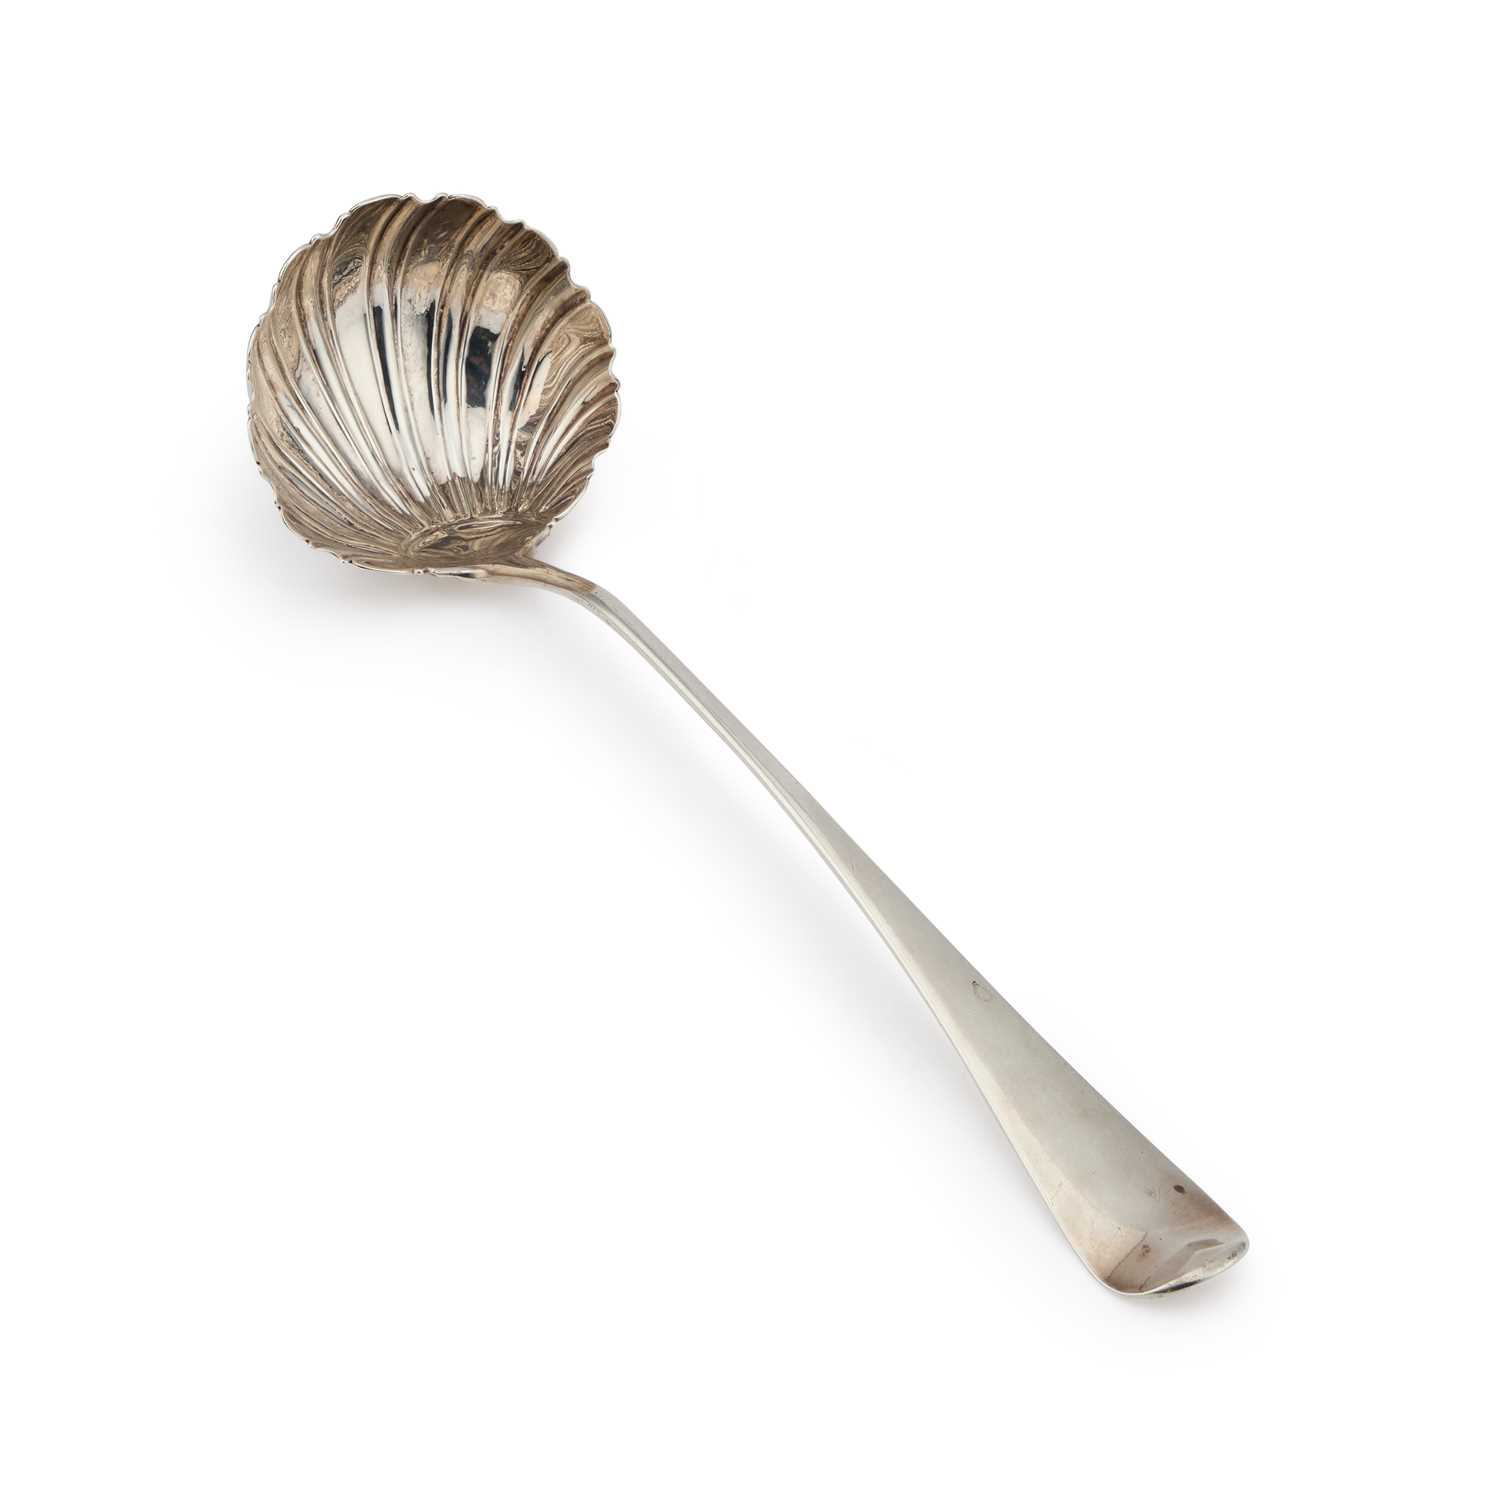 AN 18TH CENTURY SILVER SOUP LADLE BEARING THE ROYAL CREST